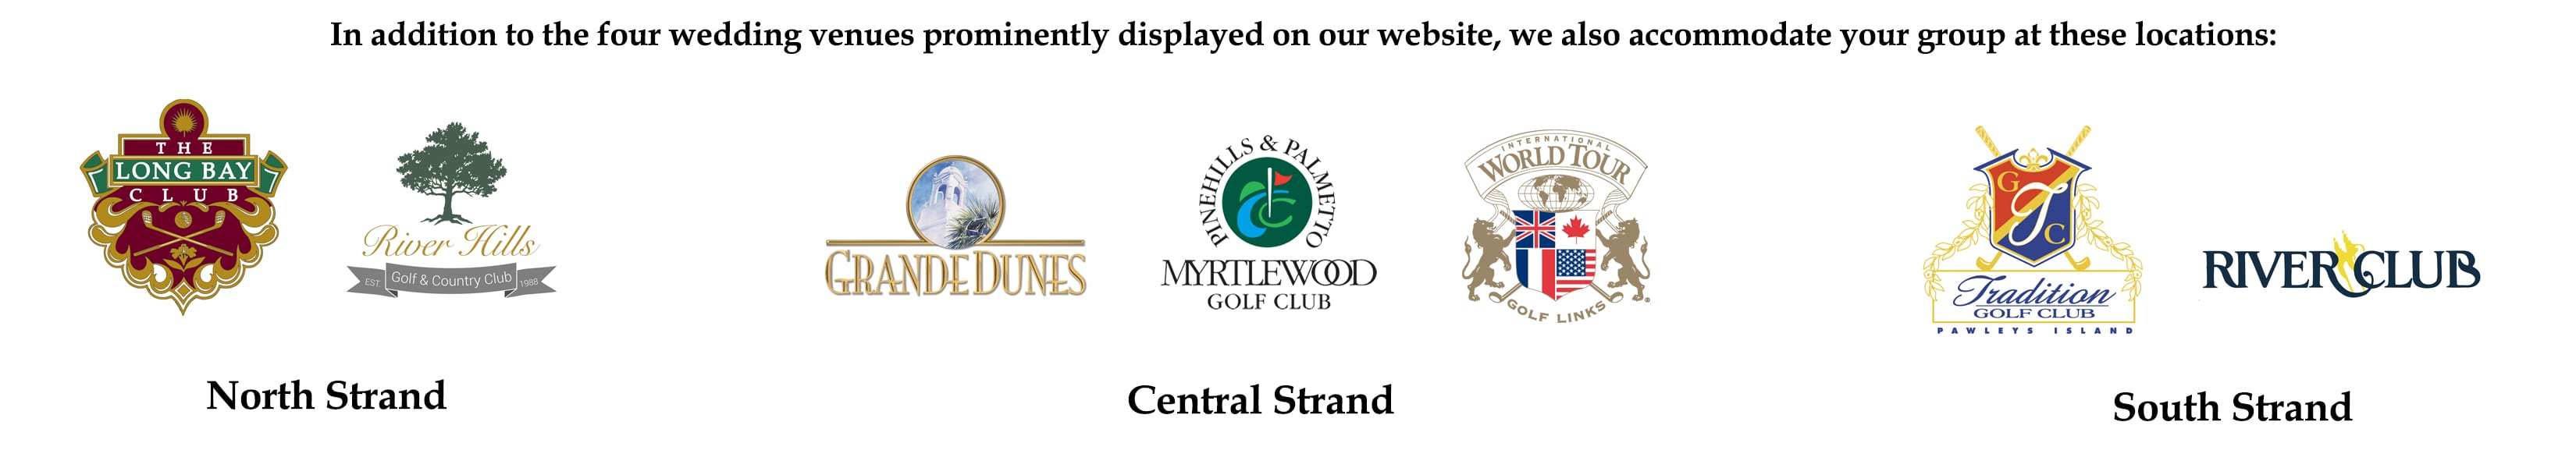 golf course logos events page